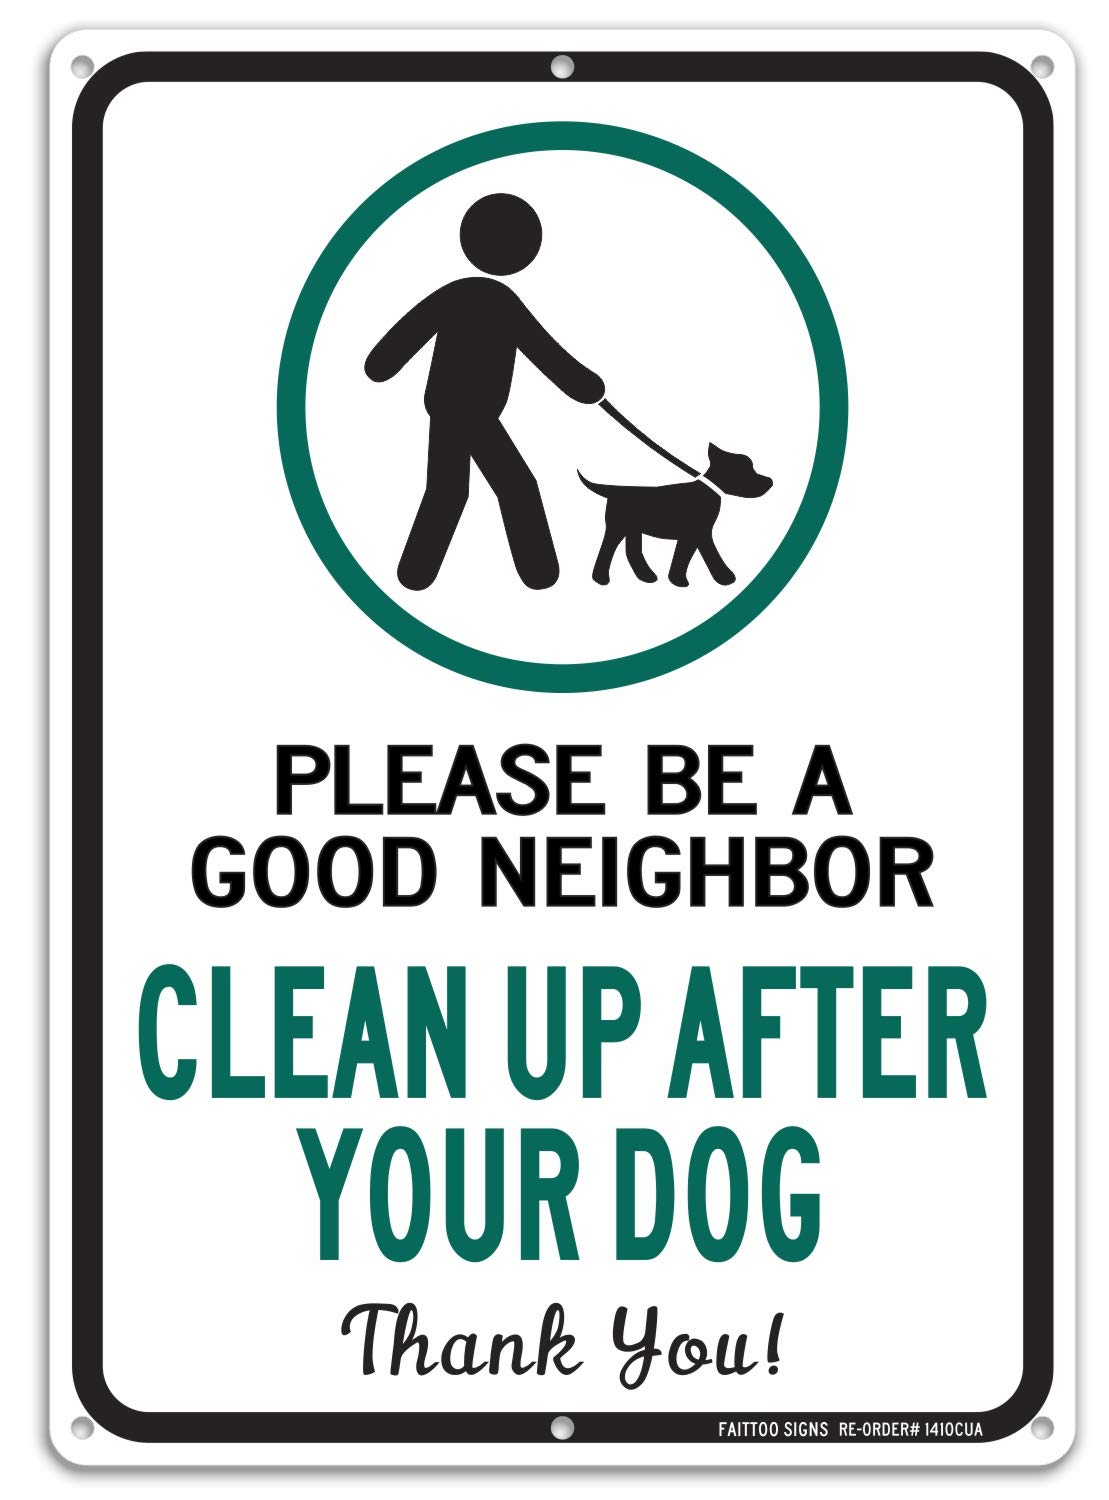 Clean Up After Your Dog Sign, Please Be a Good Neighbor, Clean Up After Your Pets, Be a Good Neighbor Sign, 14x10 Rust Free .40 Aluminum UV Printed, Easy to Mount Weather Resistant, Non-fading